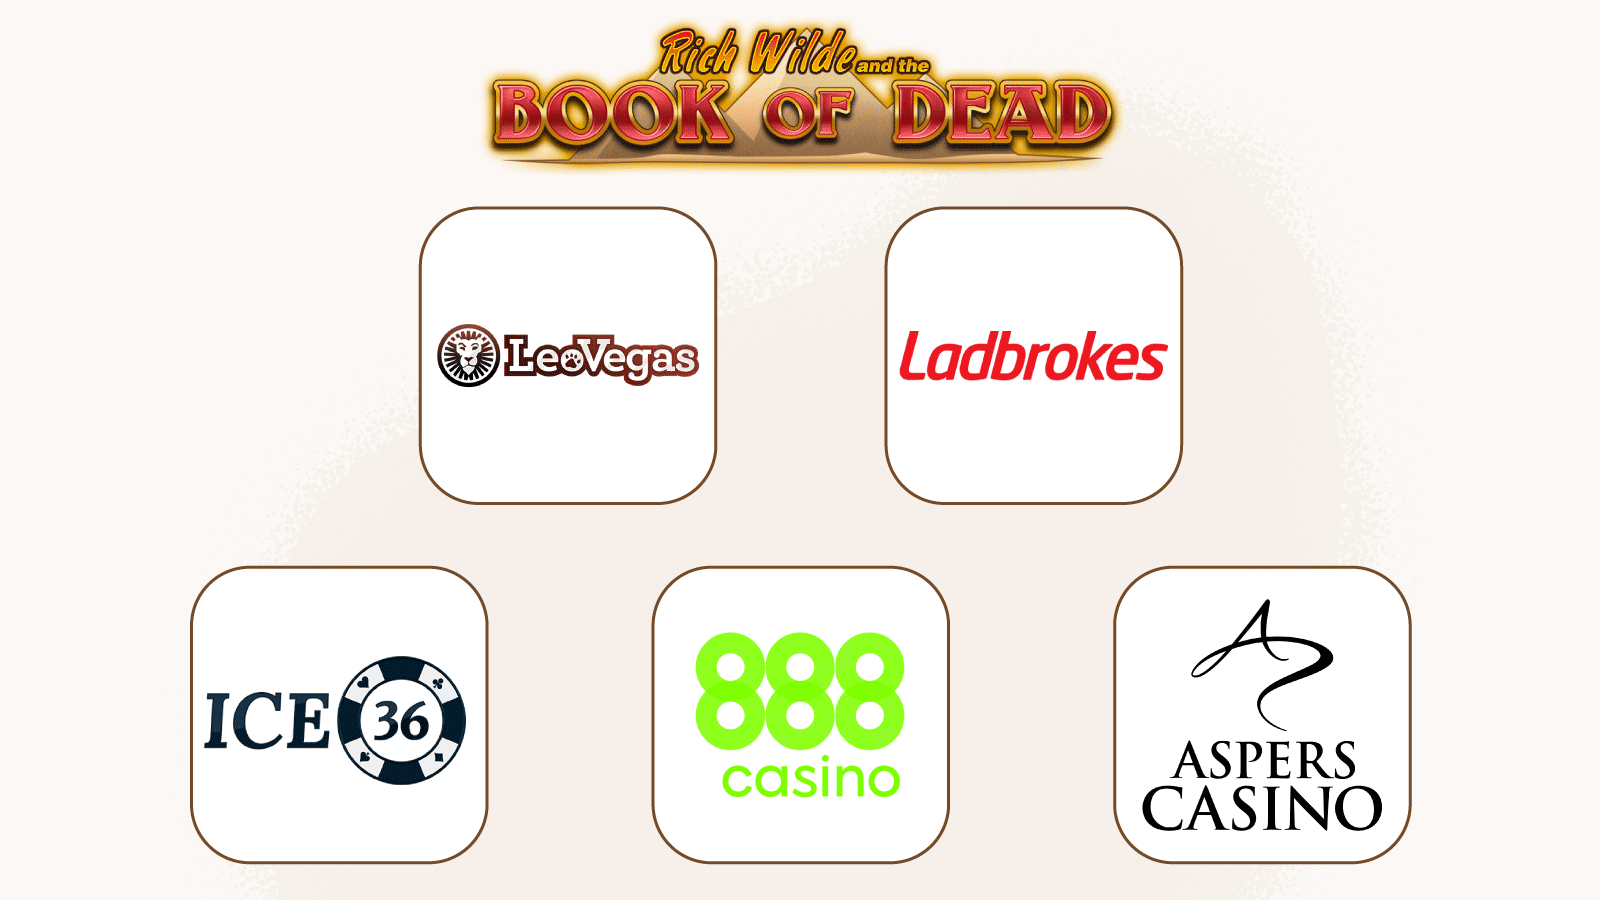 Where to get Free Spins on Book of Dead